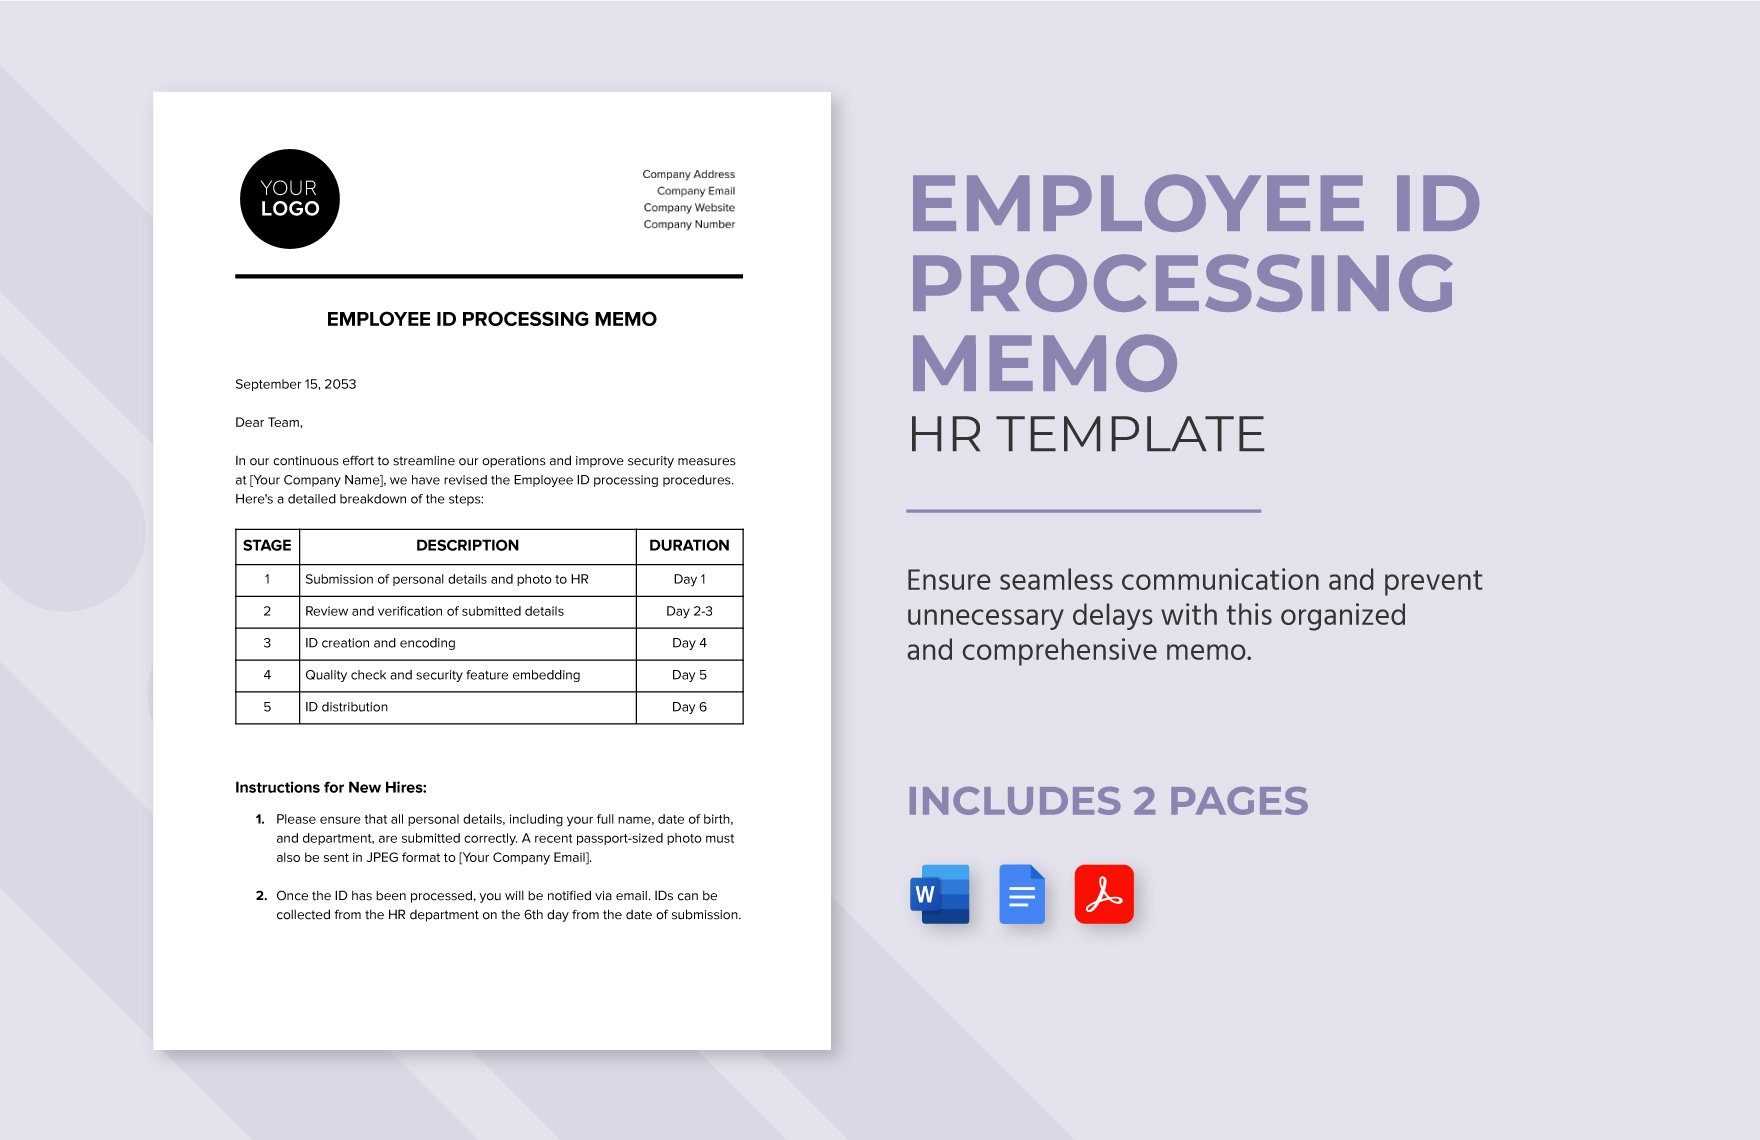 Employee ID Processing Memo HR Template